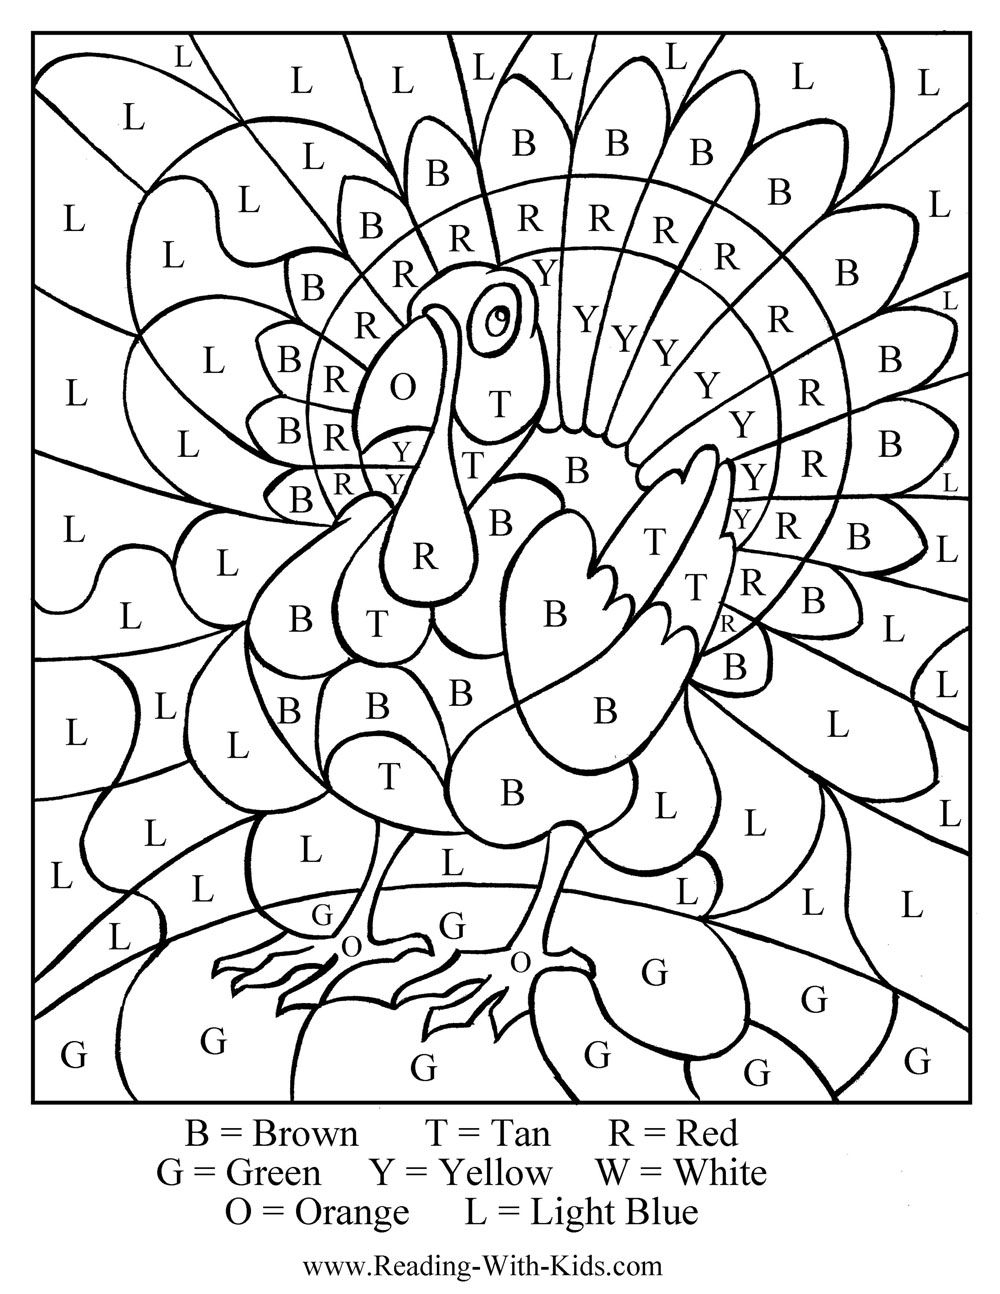 Free Printable Thanksgiving Placemats -- Several Holiday Activities - Printable Turkey Puzzle